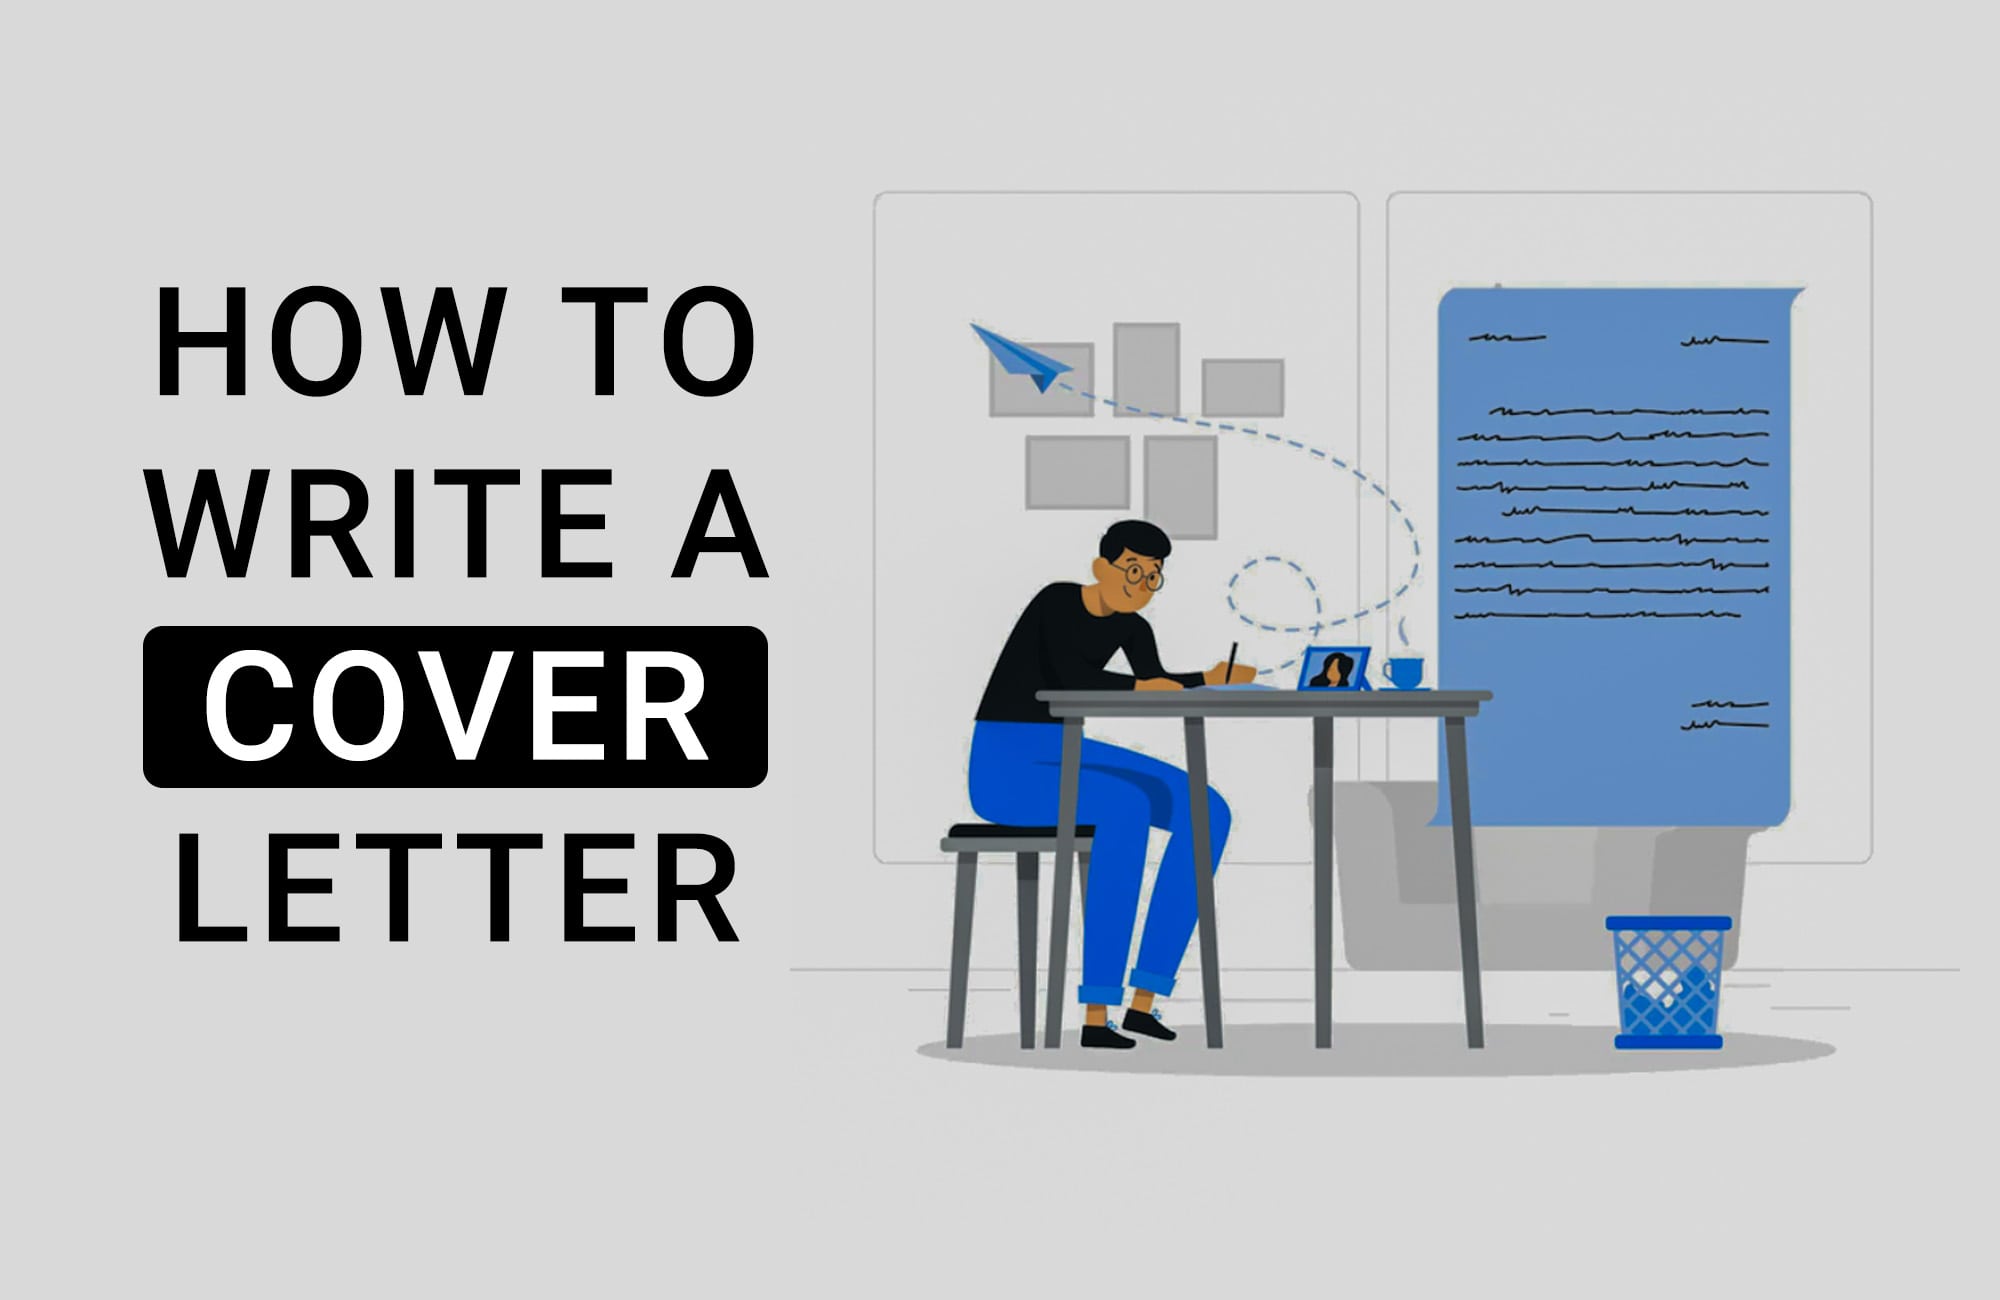 How To Write A Cover Letter - Jobs/Vacancies - Nigeria